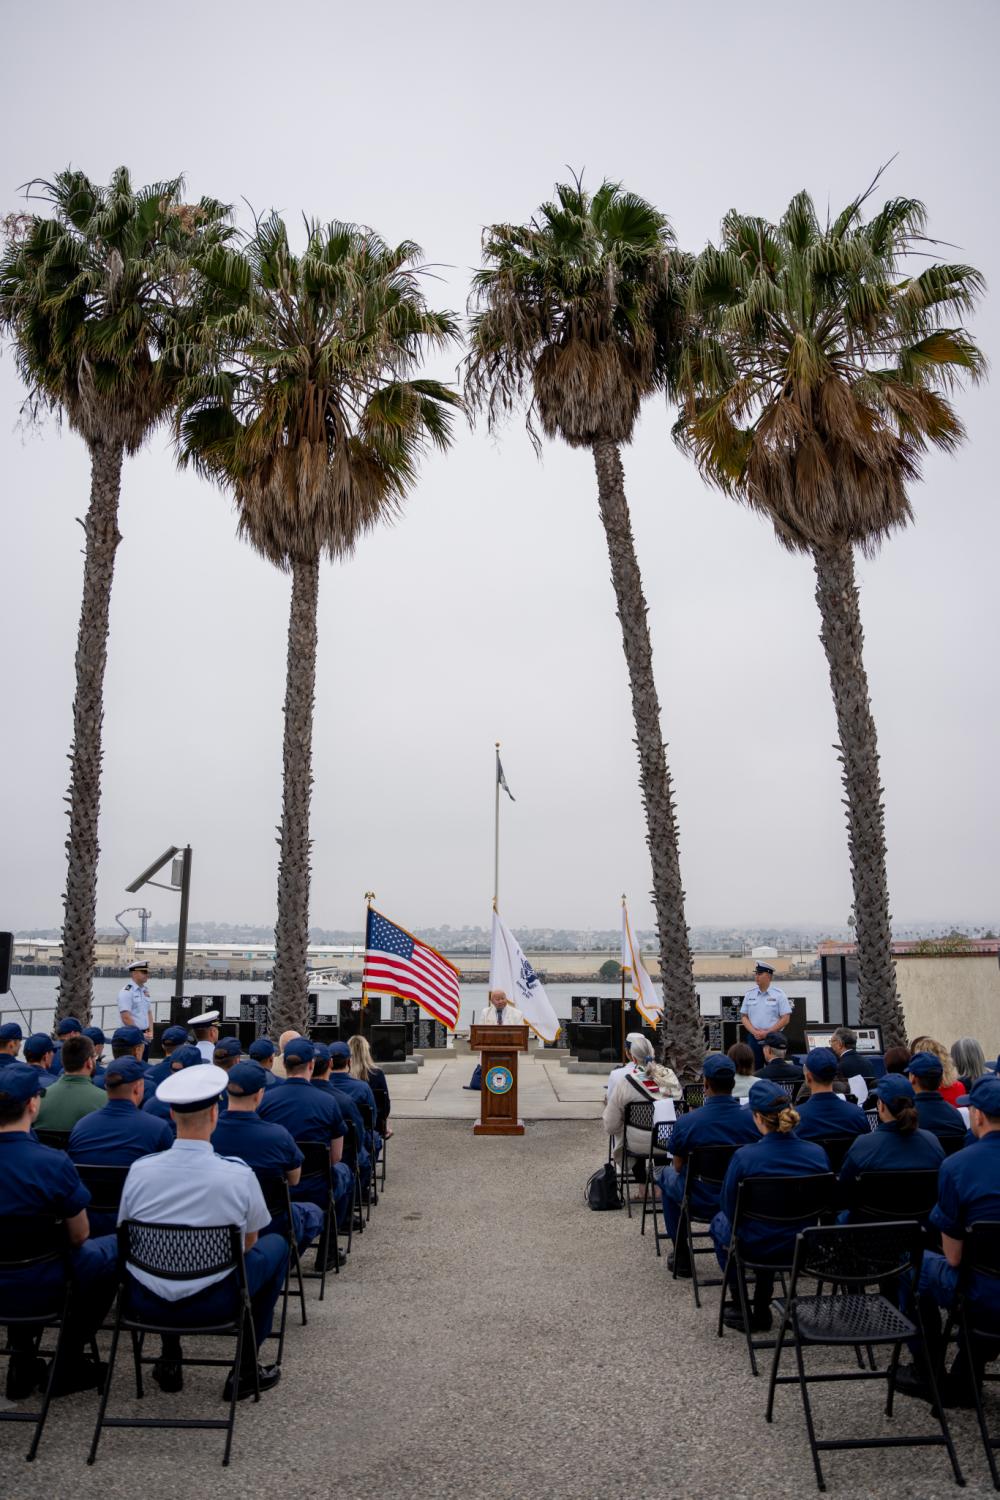 Coast Guardsmen, family and friends attend a ceremony presenting Rikio Izumi with the National Defense Service Medal San Pedro, California, June 10, 2022. The ceremony presented the now 93-year-old Izumi with the National Defense Service Medal for his service from 1951 to 1953. (U.S. Coast Guard photo by Petty Officer 3rd Class Aidan Cooney)